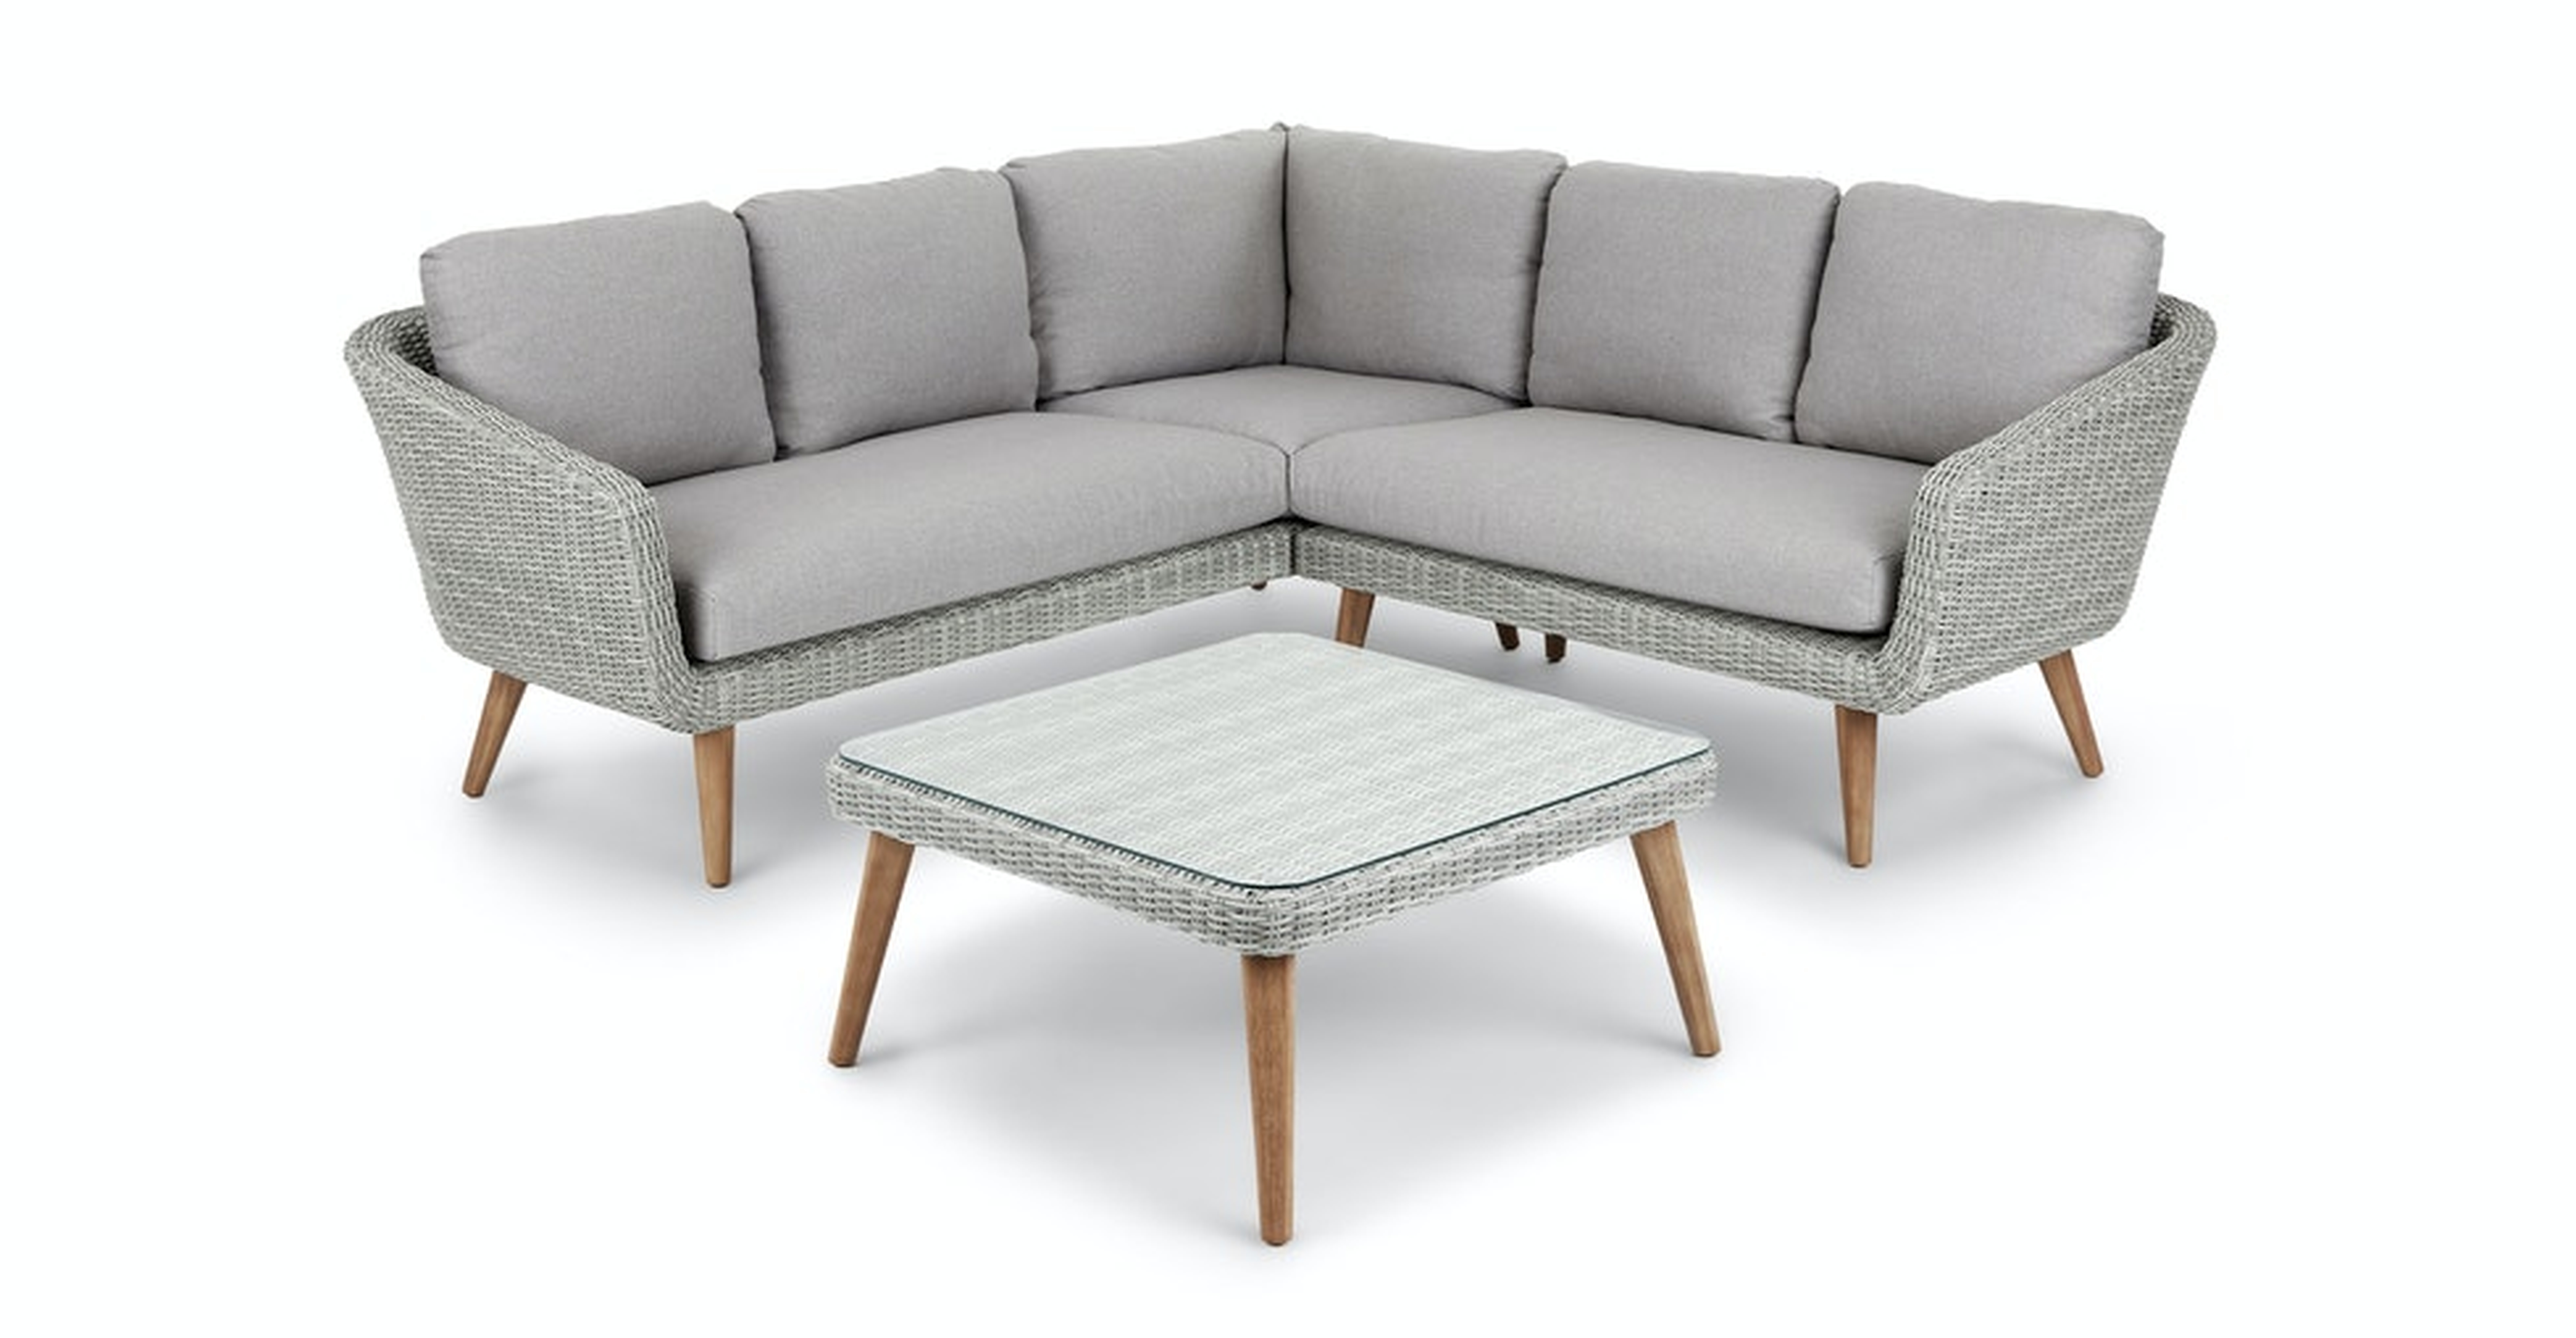 Ora Beach Sand Sectional Set - Article